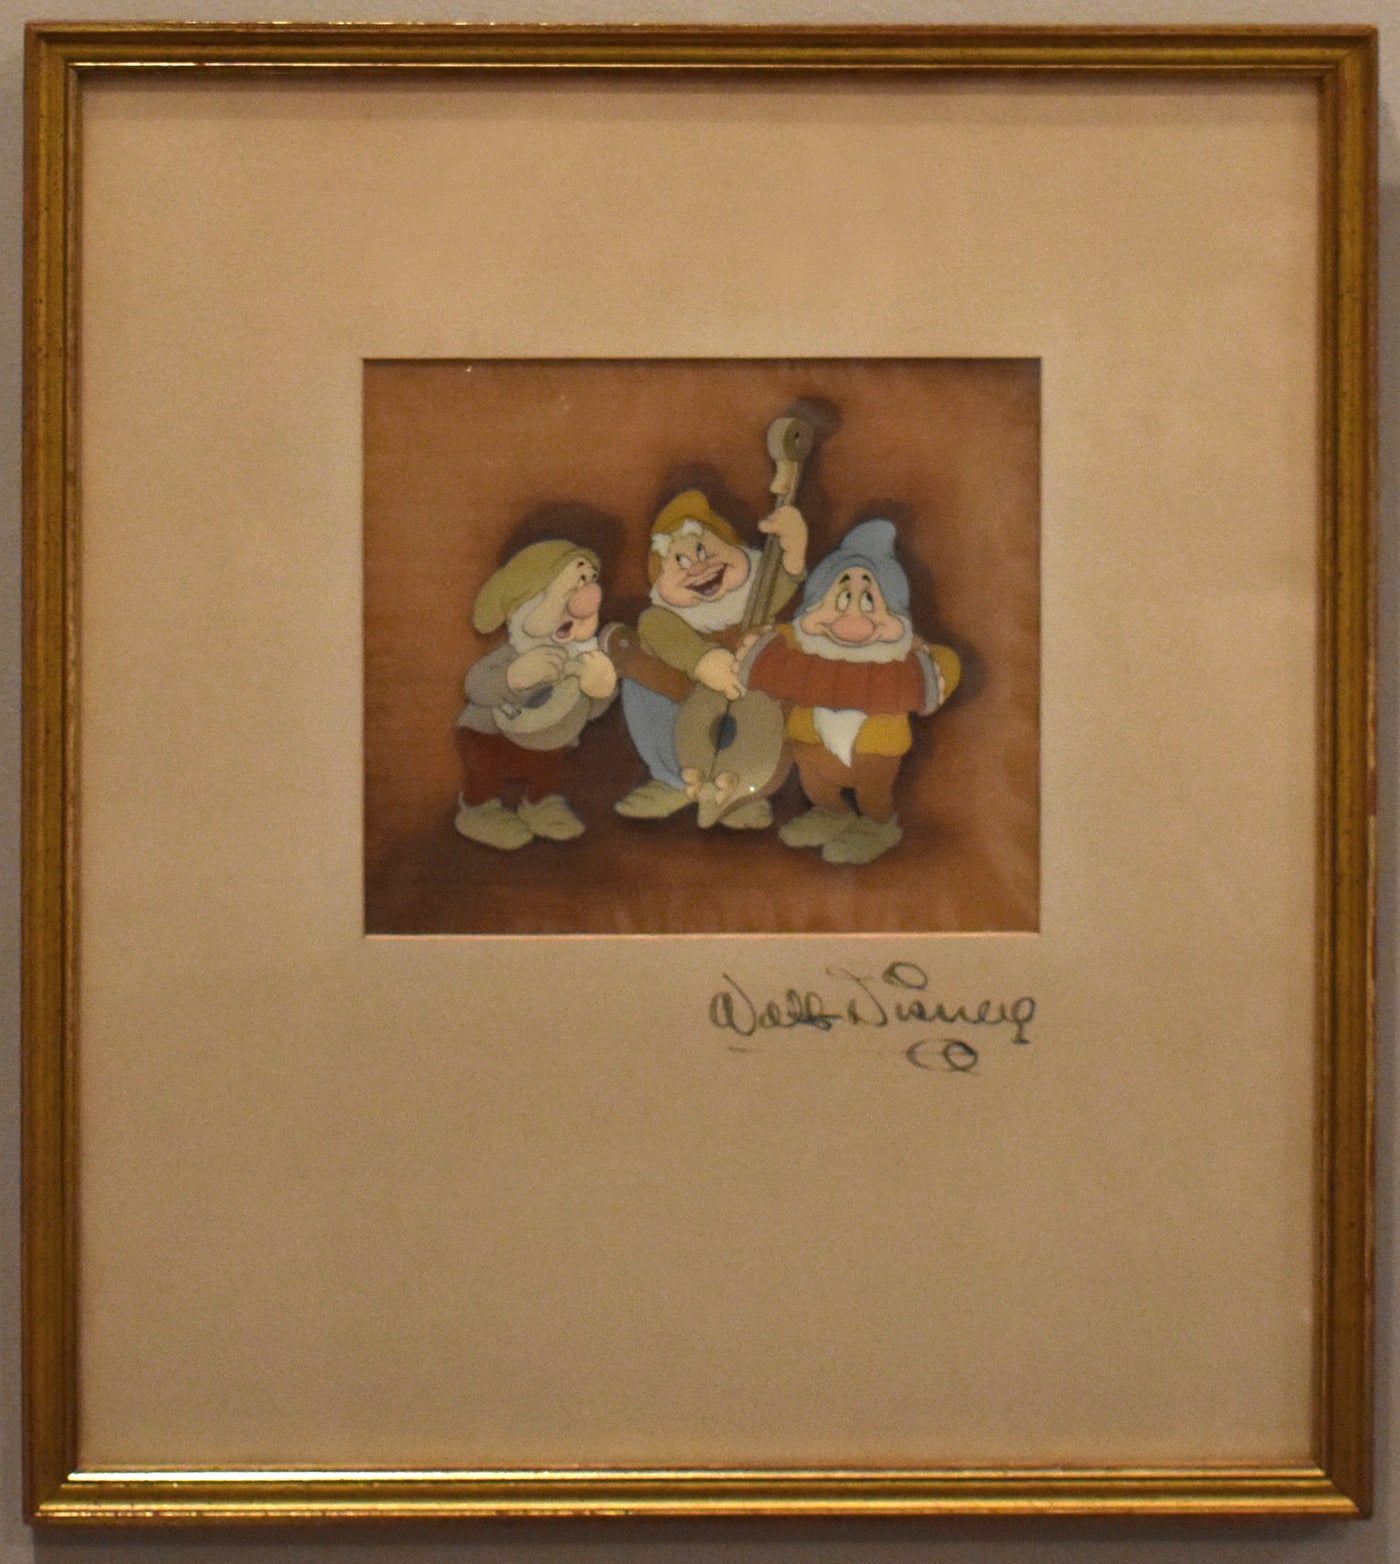 Original Walt Disney Production Cel on Courvoisier Background from Snow White and the Seven Dwarfs, Signed by Walt Disney